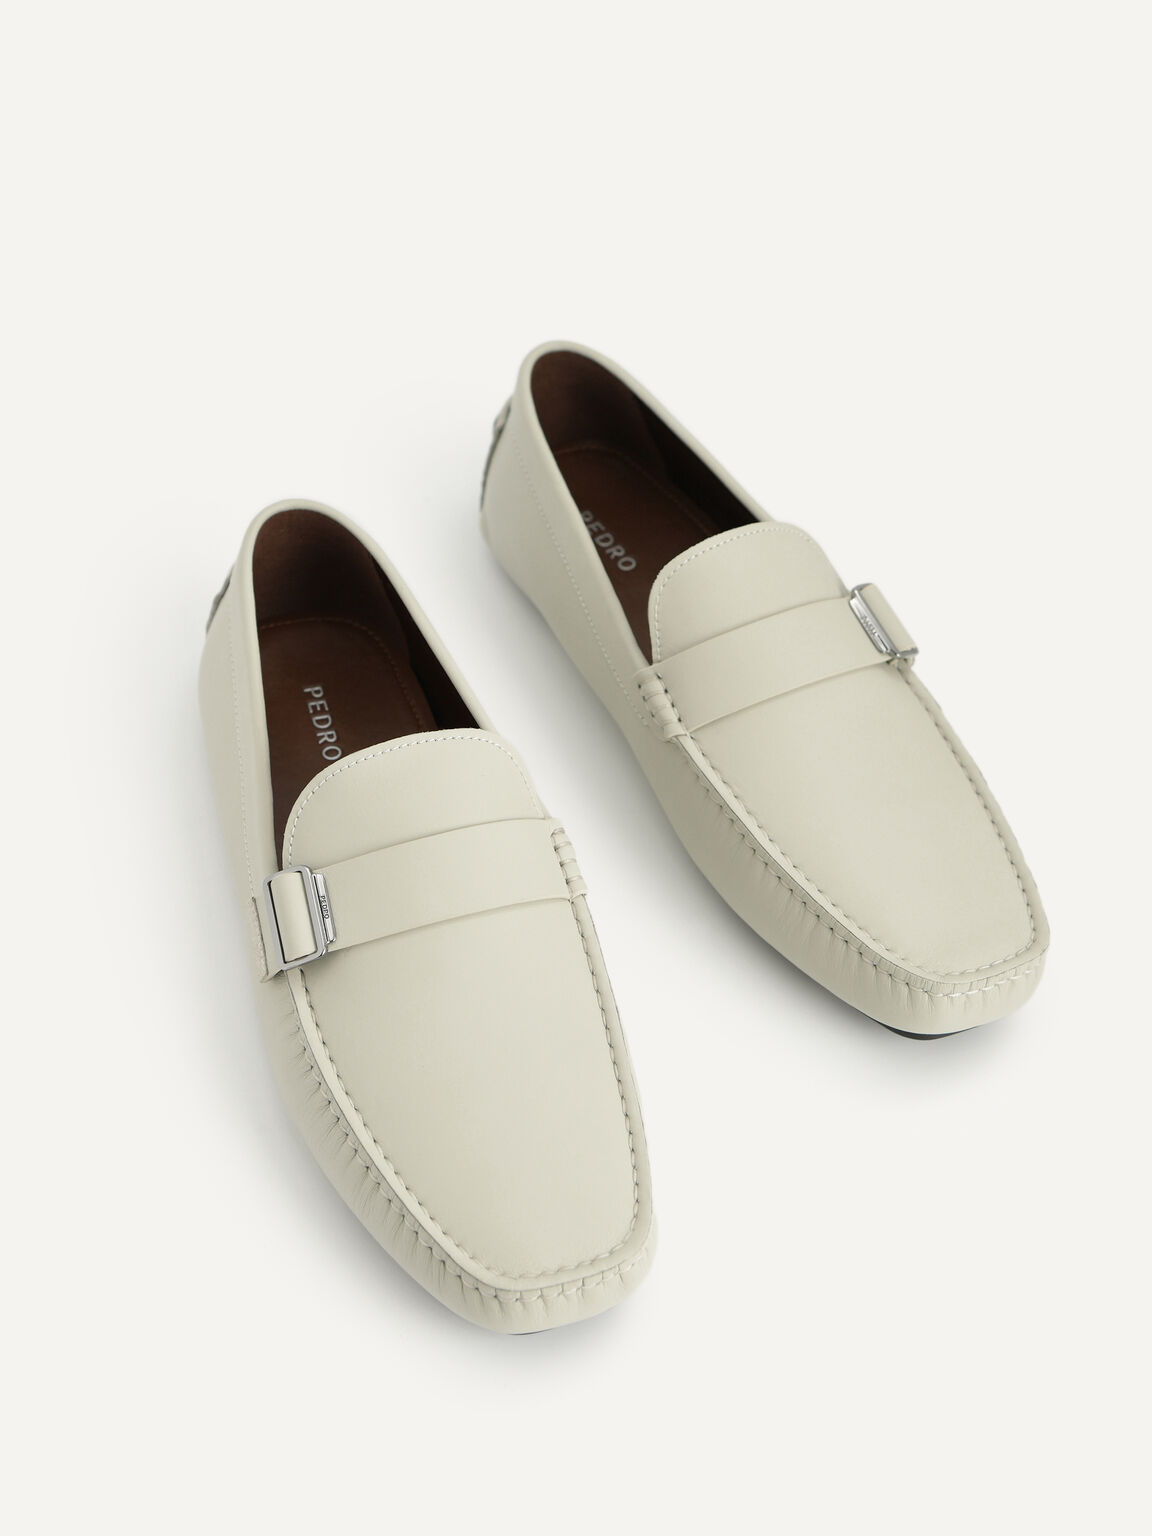 Leather Moccasins with Buckle Detail, Light Grey